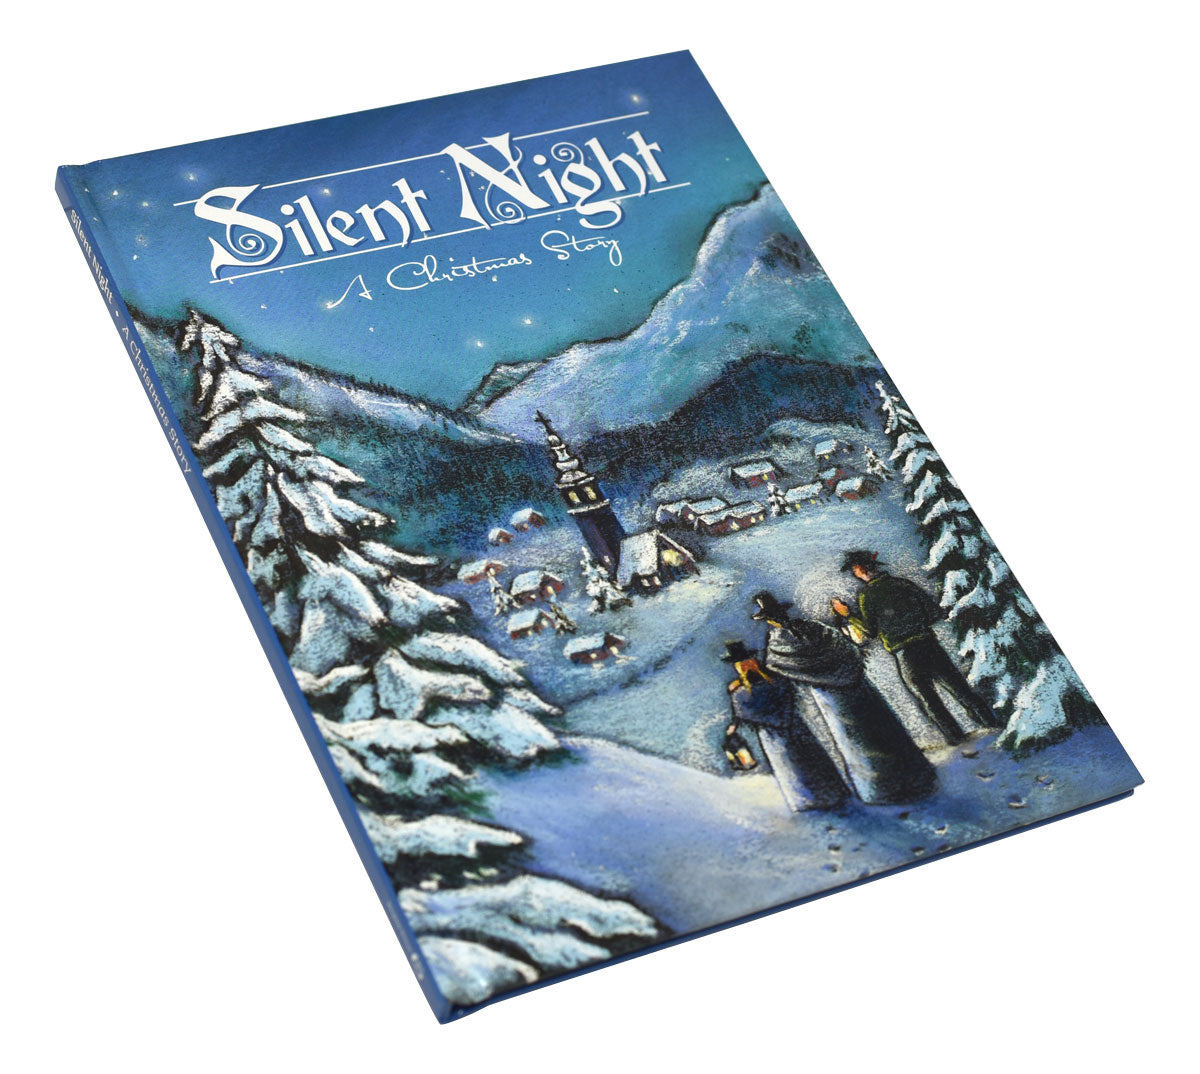 Silent Night: A Christmas Story